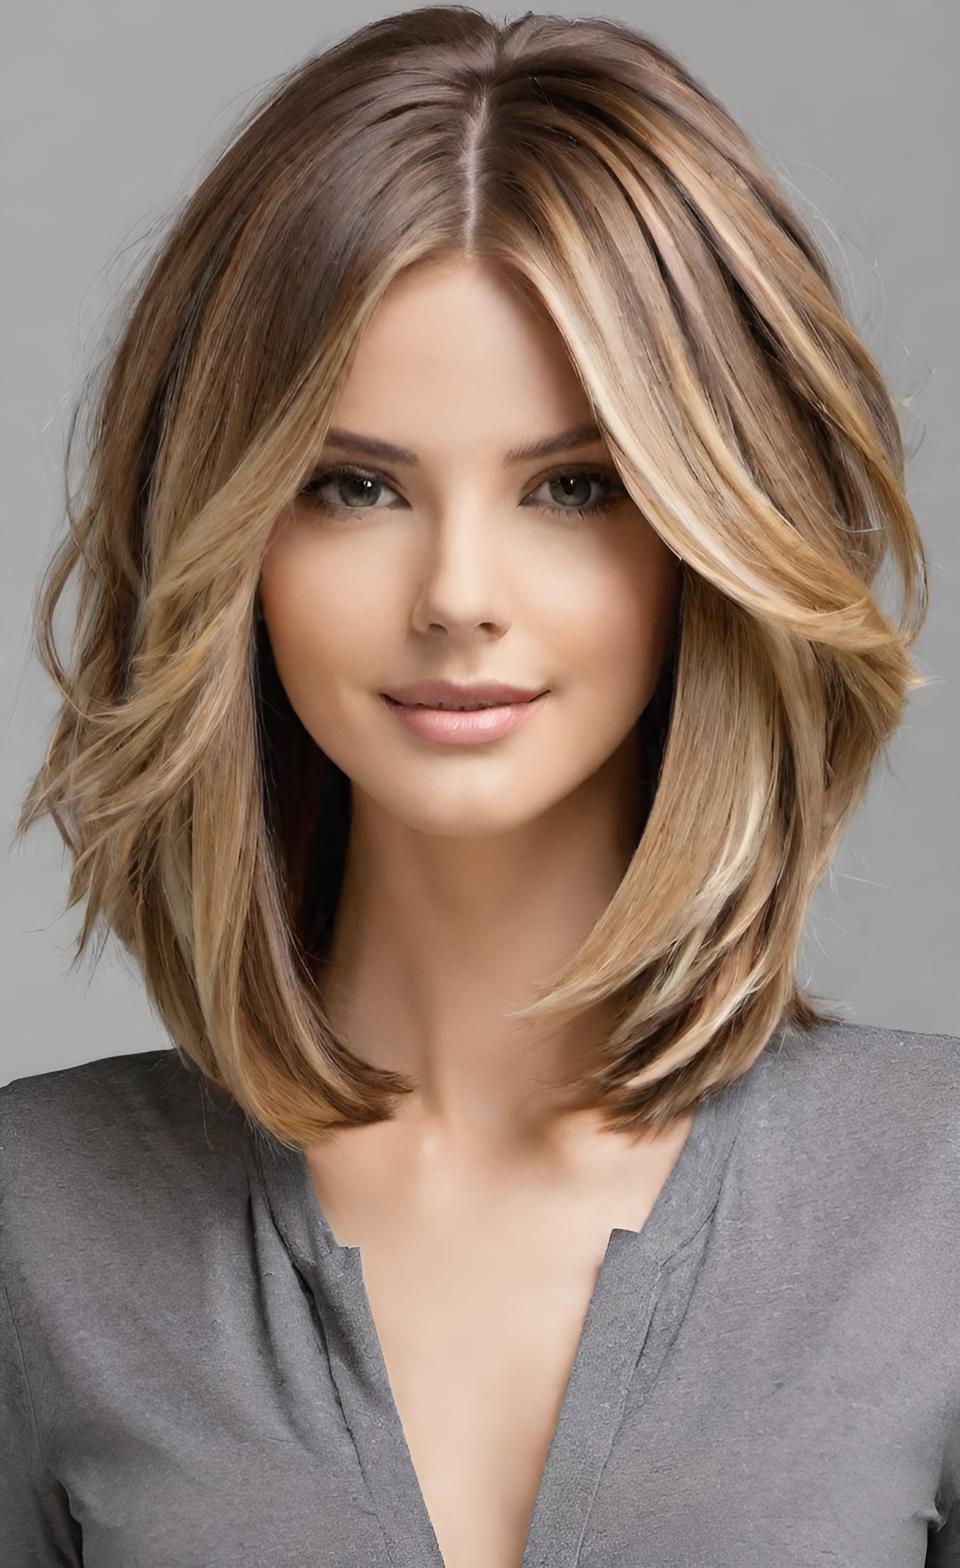 24 Beautiful Medium Length Hairstyles for Women to Wear in